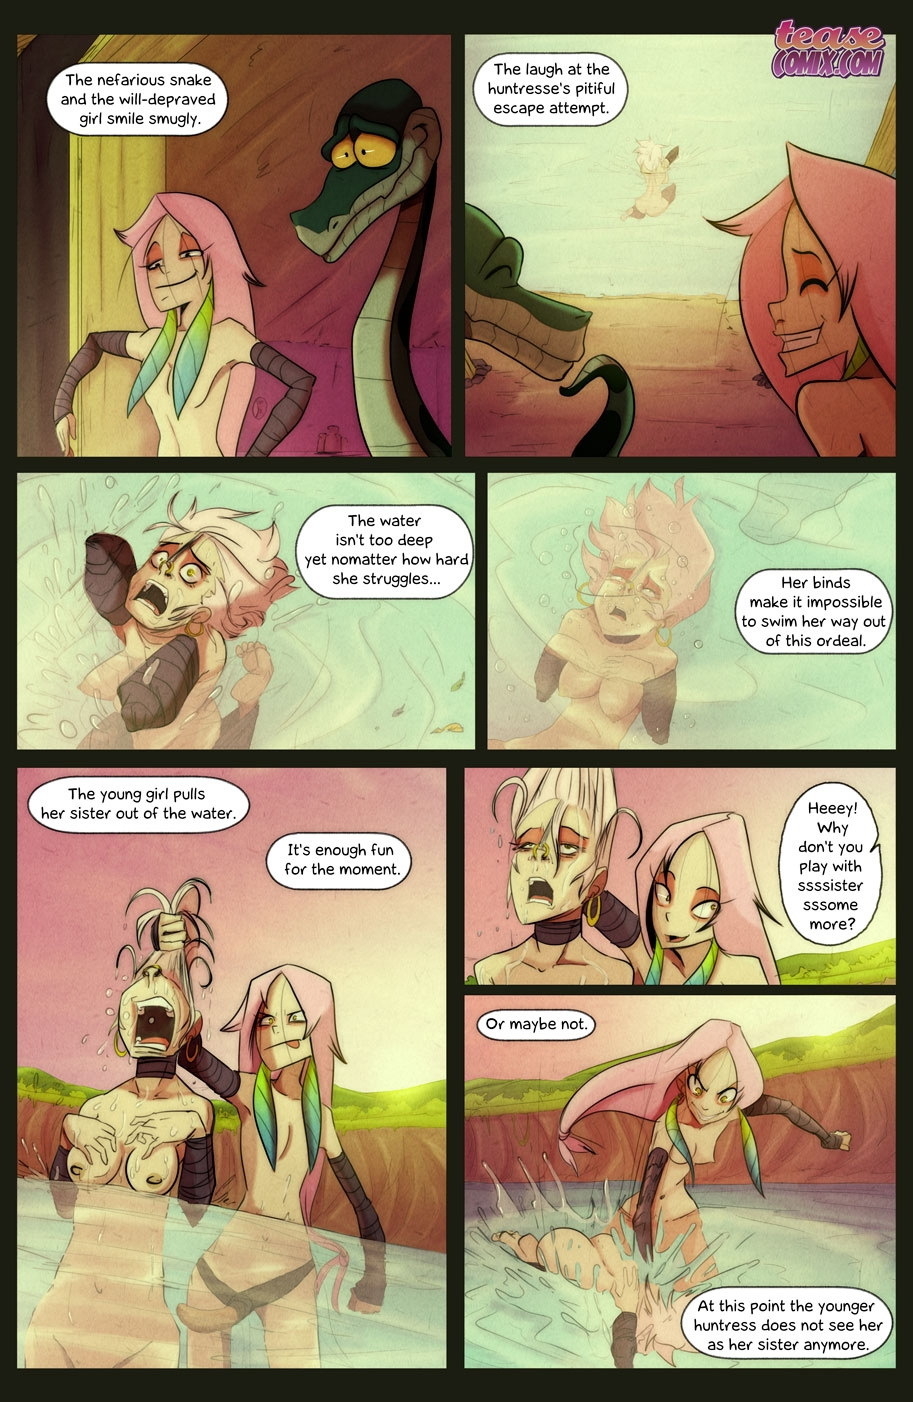 The Snake and The Girl 5 - Page 3